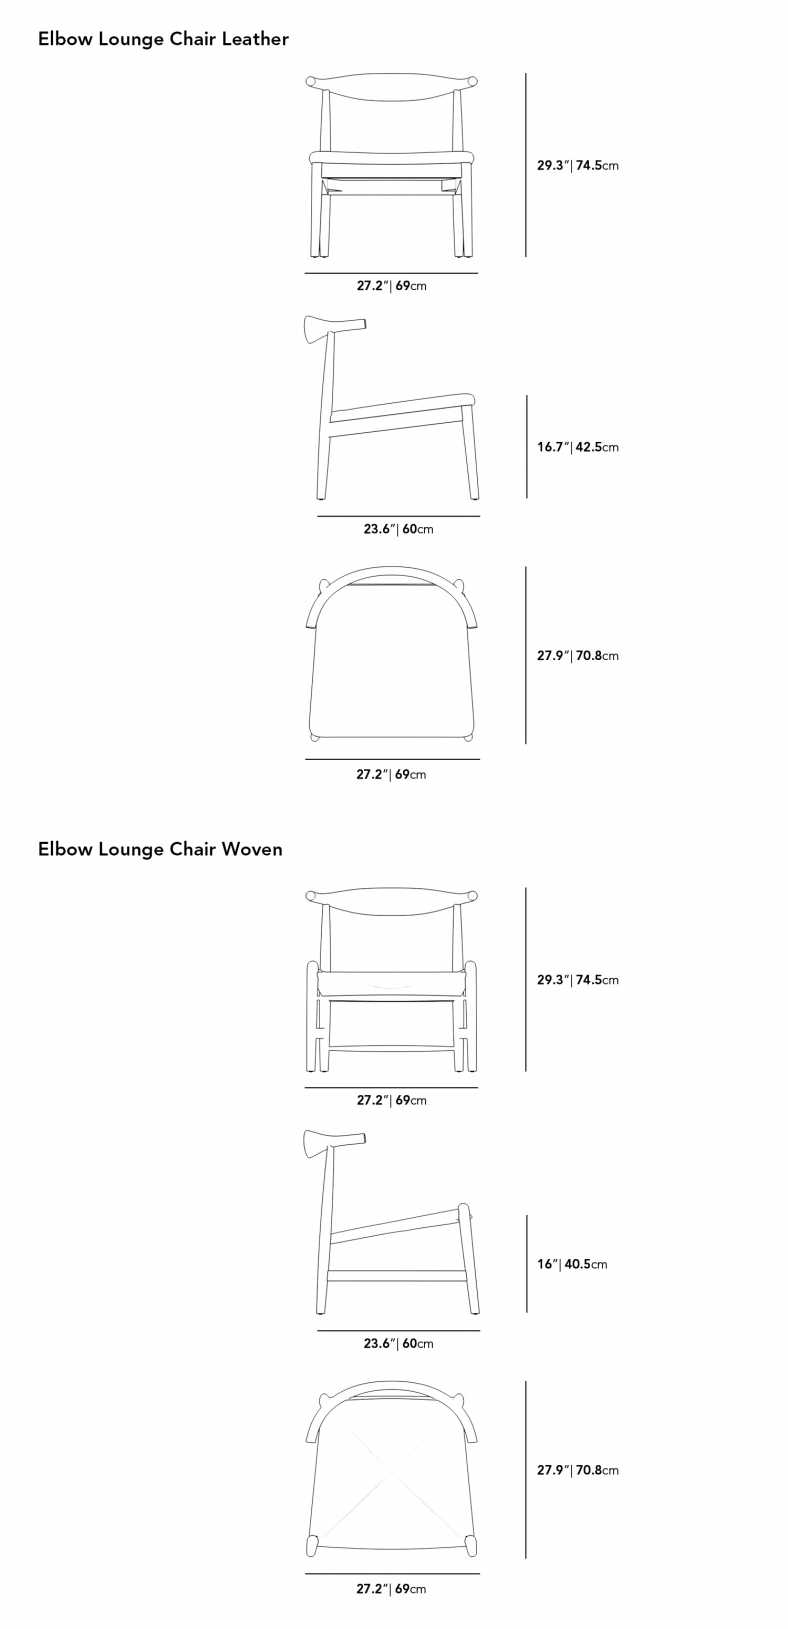 Dimensions for Elbow Outdoor Lounge Chair - Woven